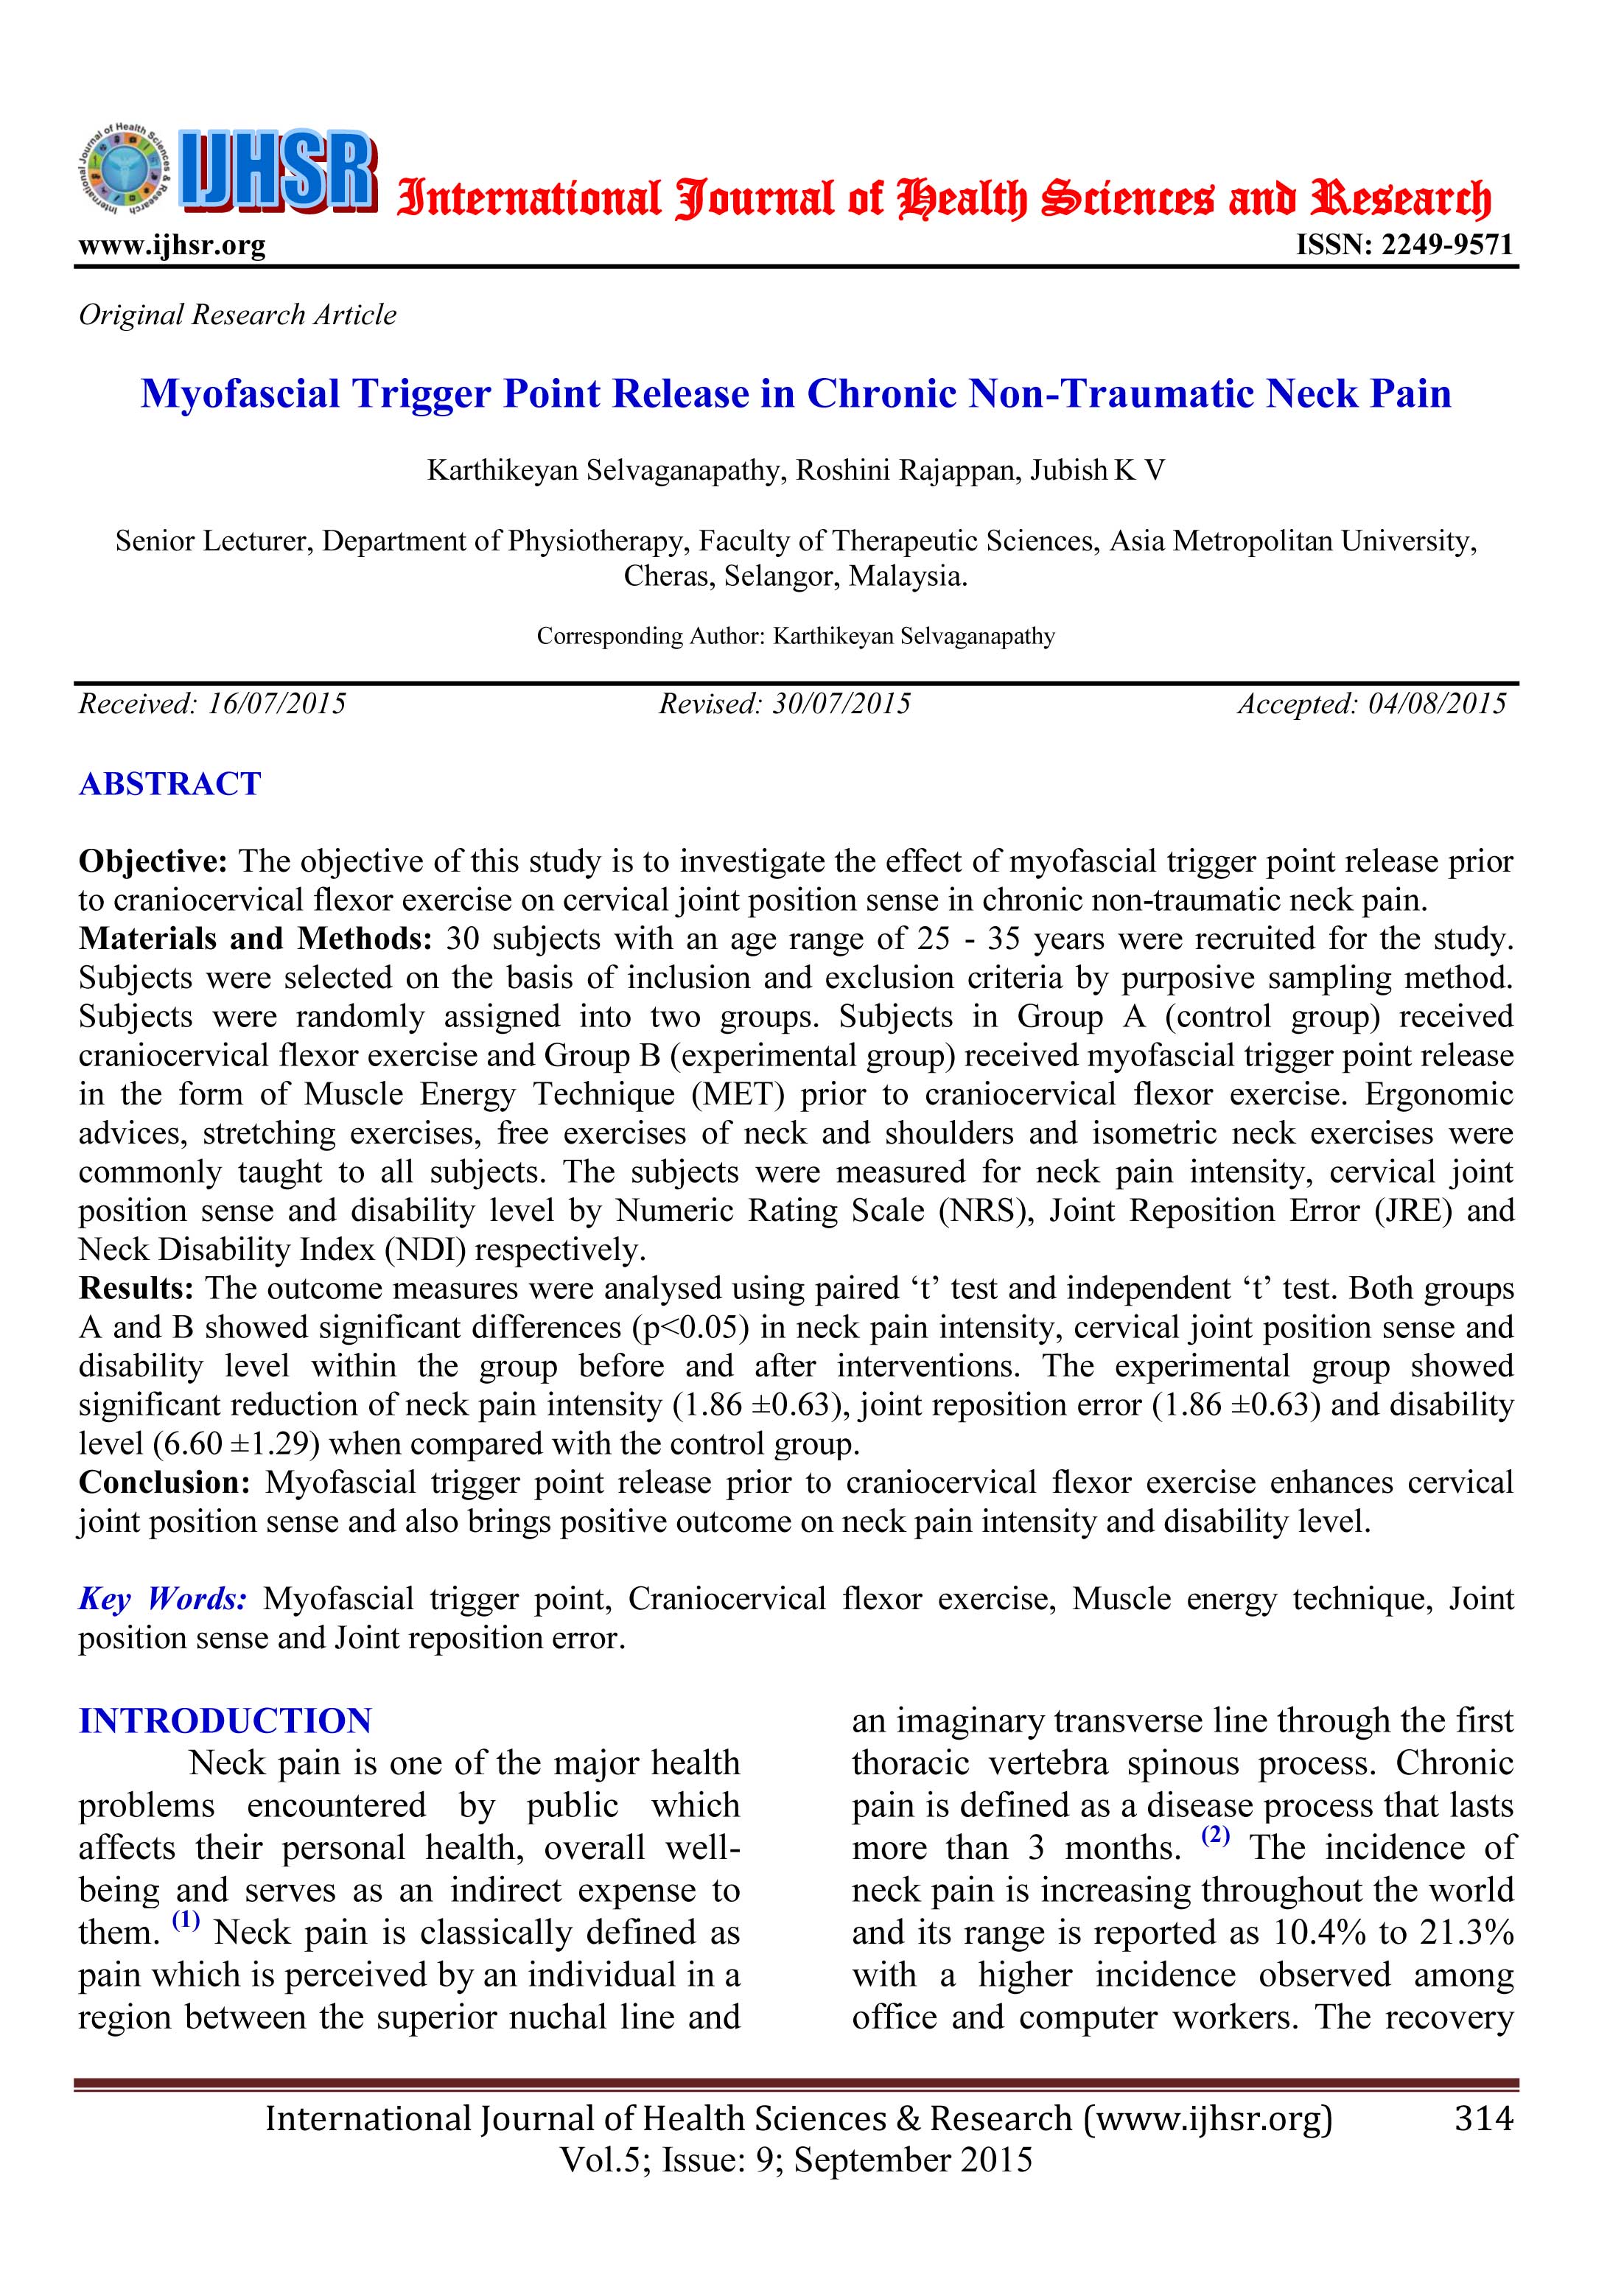 Myofascial Trigger point Release